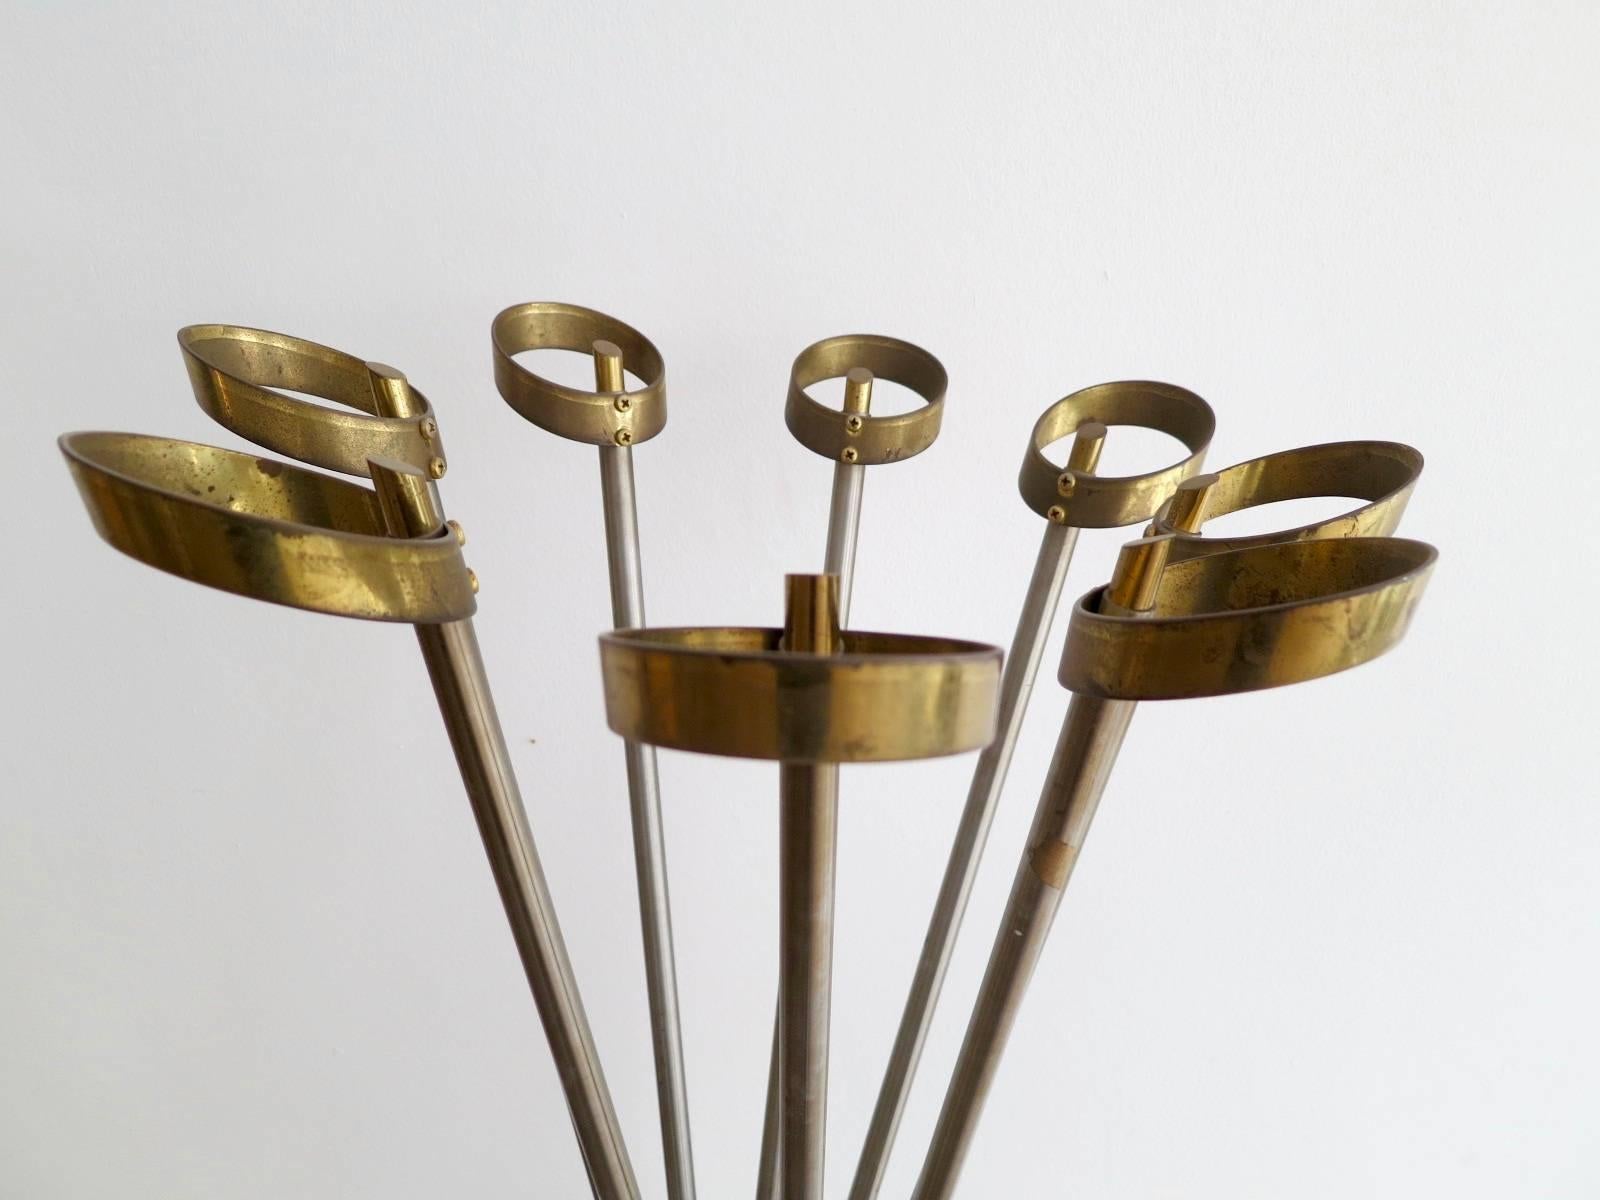 A brass and steel stand with twisted steel supports and circular brass accents.